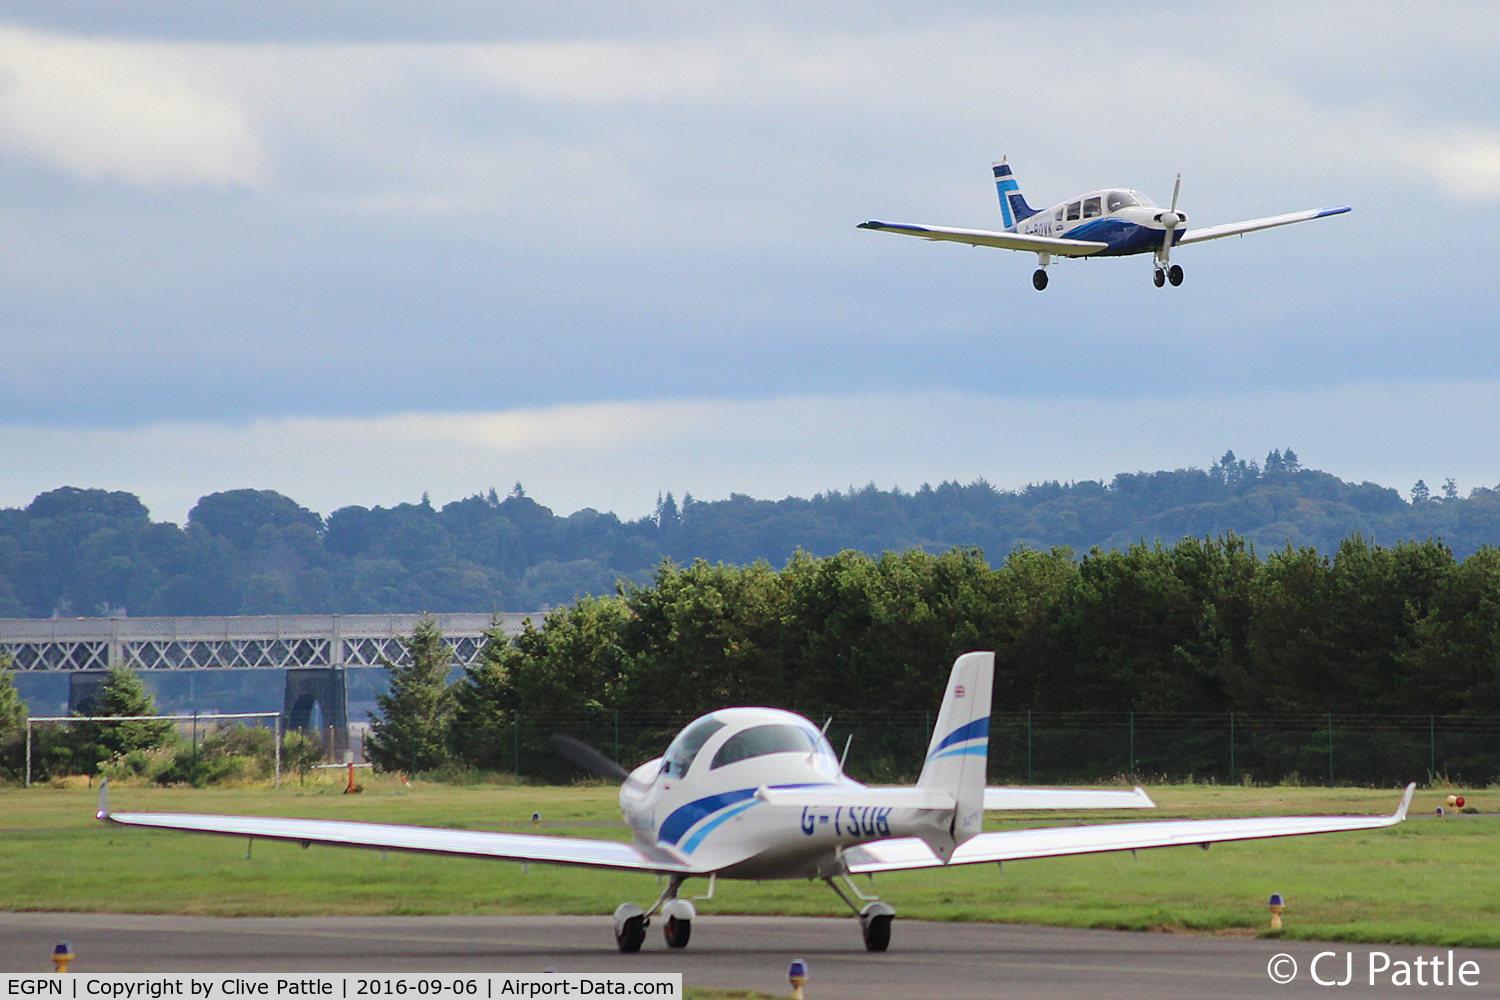 Dundee Airport, Dundee, Scotland United Kingdom (EGPN) - Airfield activity at Dundee EGPN